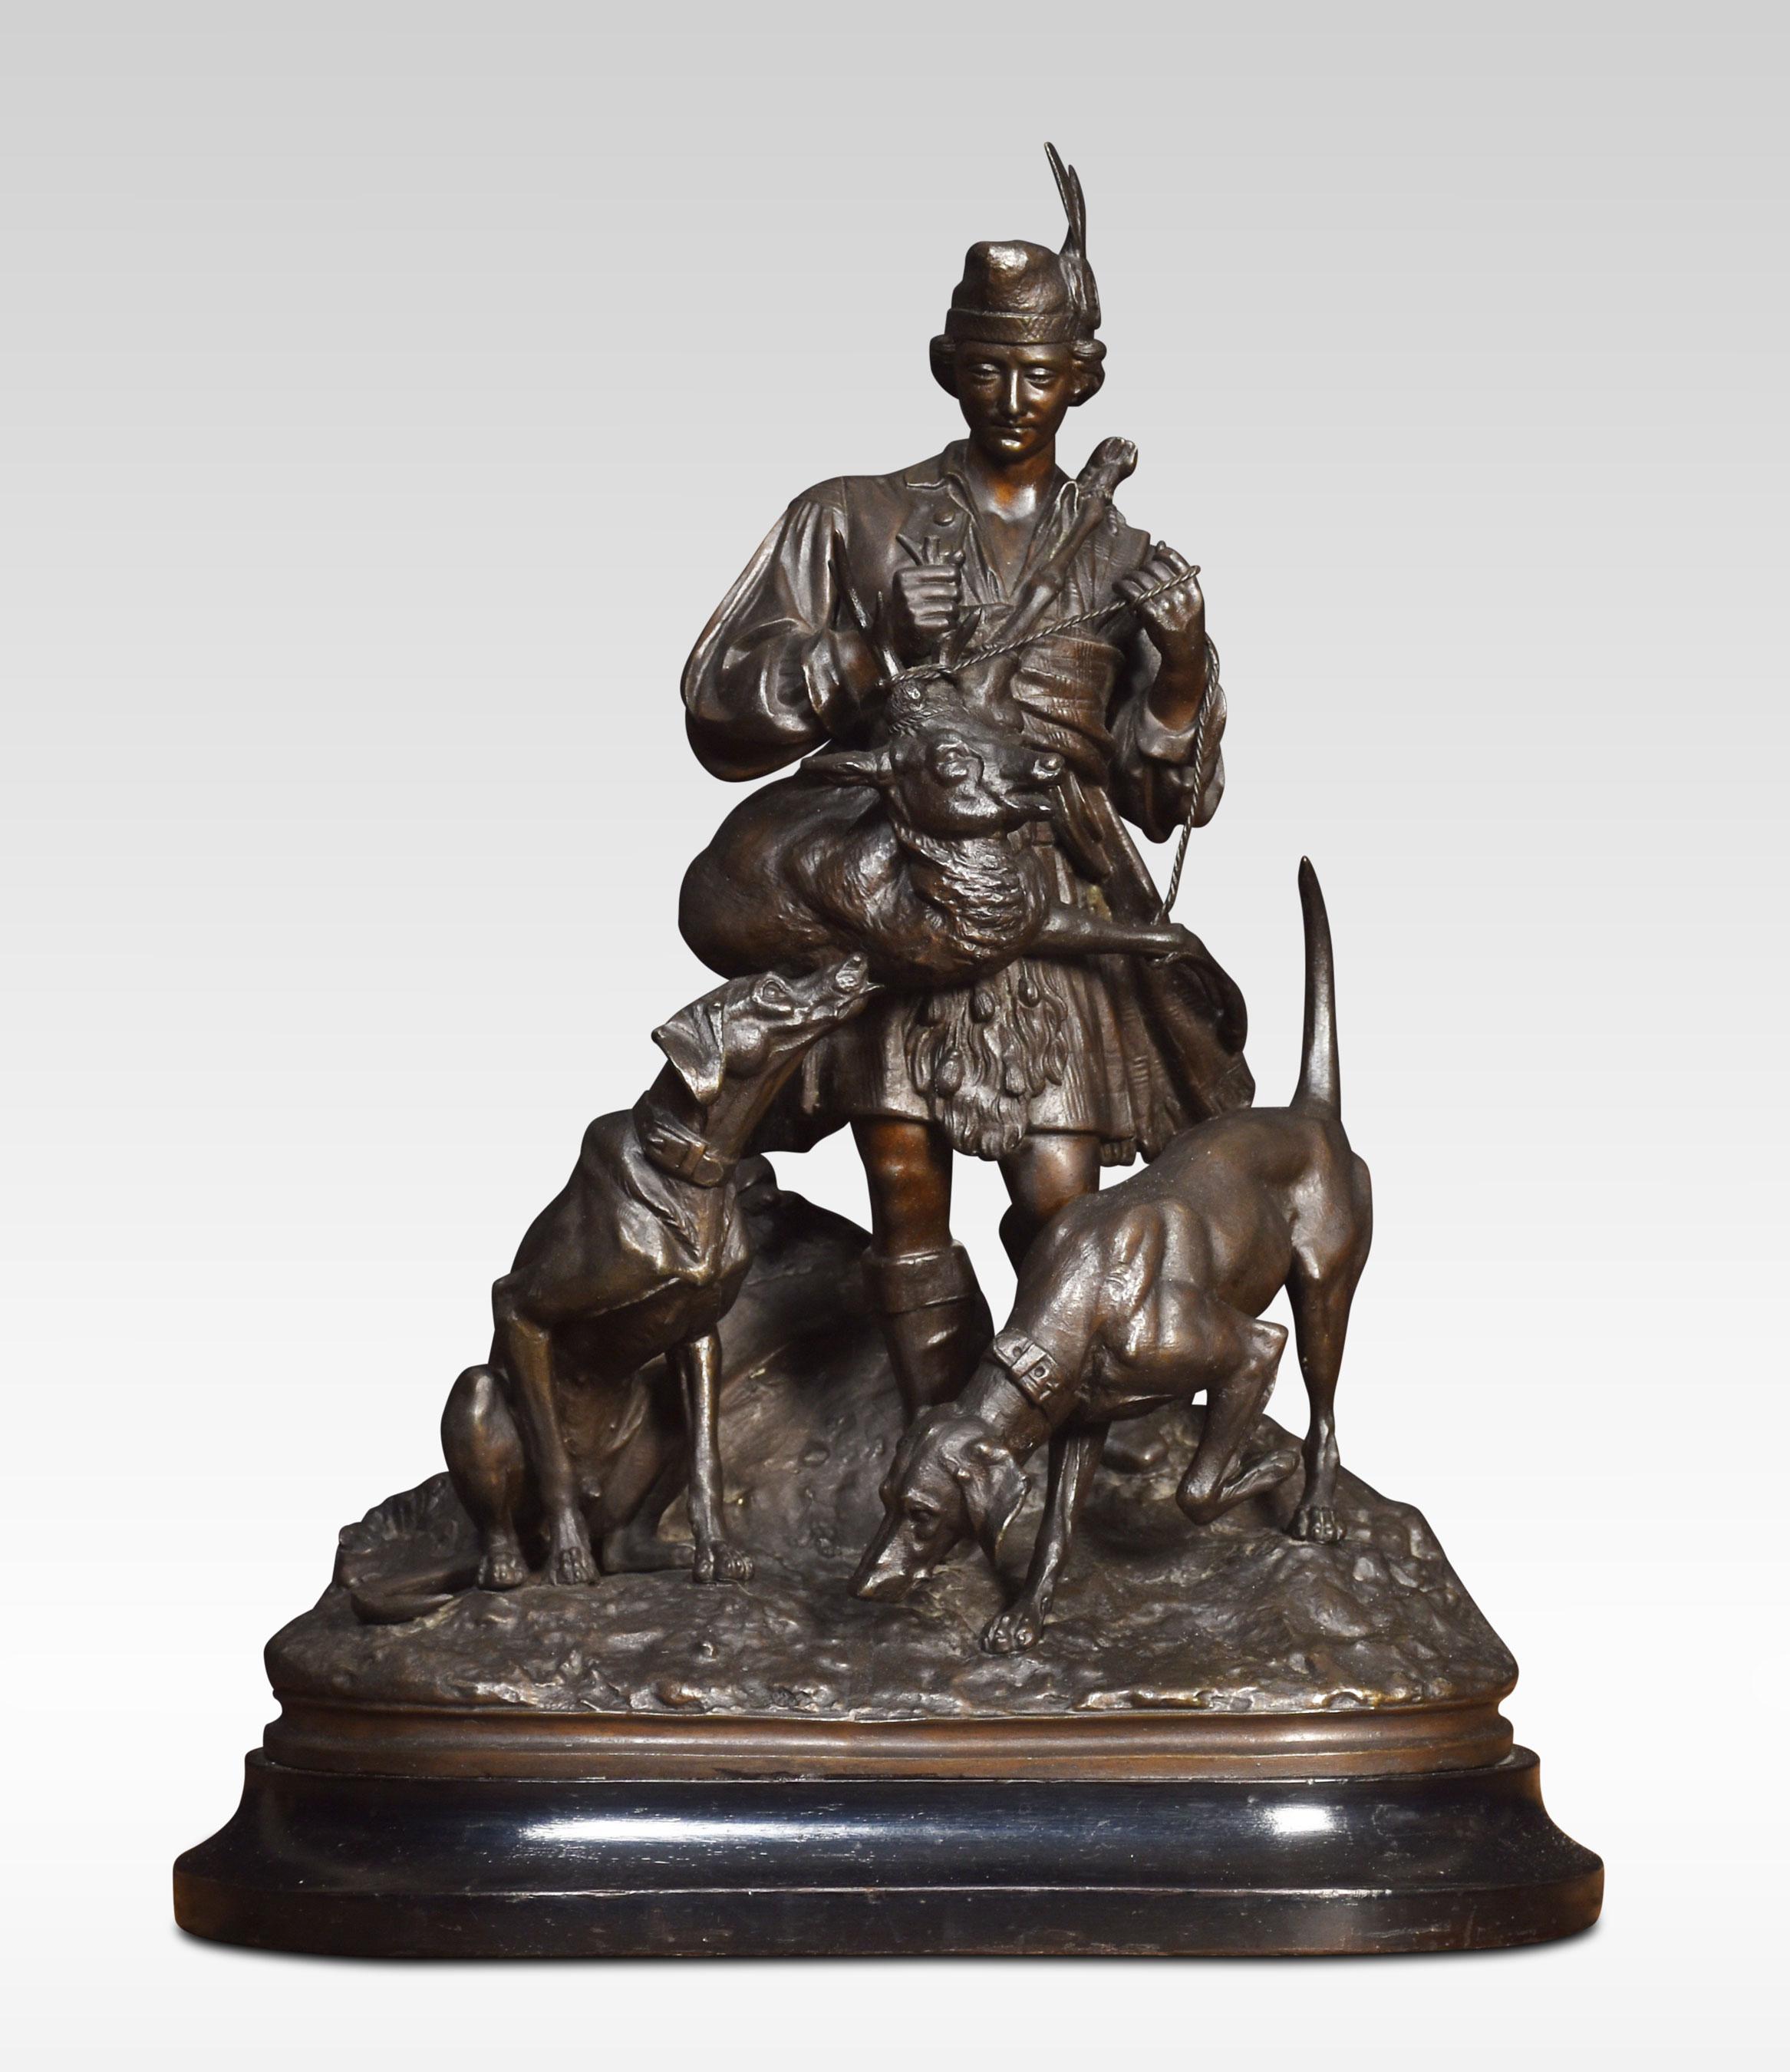 A pair of spelter Scottish hunting figures in traditional dress with deerhounds. Raised up on ebonised bases.
Dimensions
Height 16.5 Inches
Width 13.5 Inches
Depth 7 Inches.